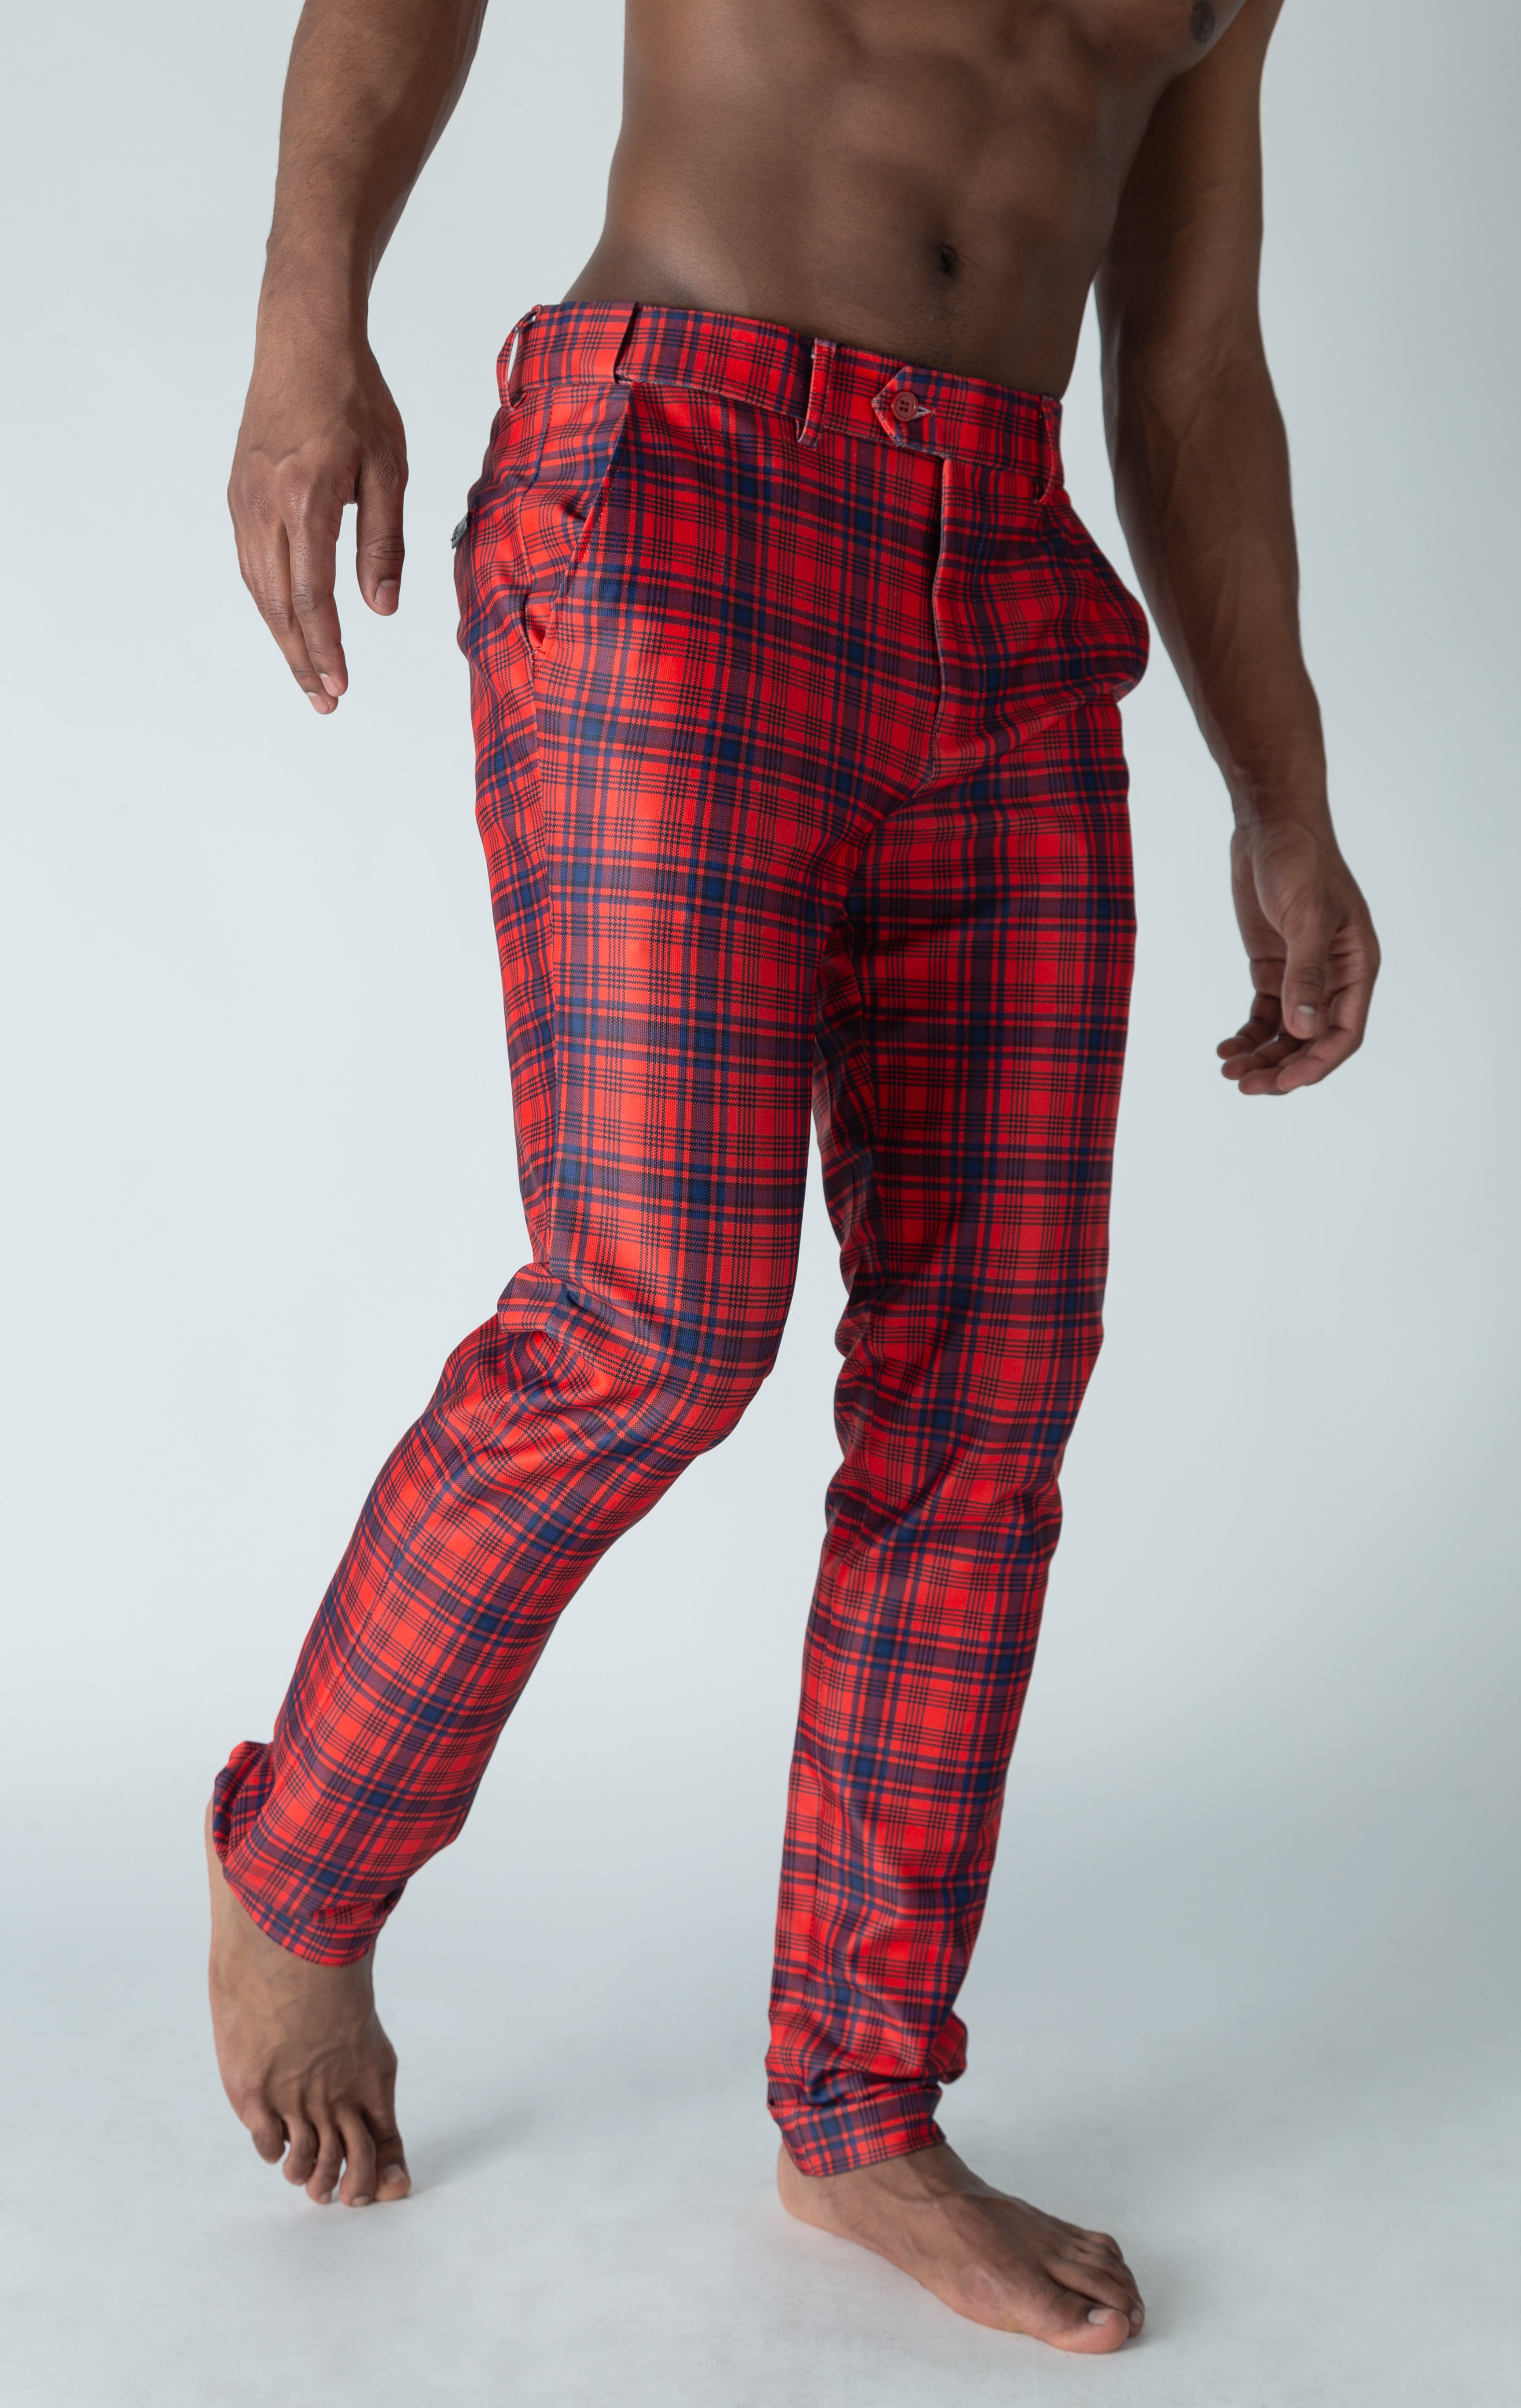 Men's red chino pants with a checkered plaid design. The pants feature an elastic waistband for comfort and stretch, and are made from a lightweight cotton-spandex blend fabric. Inseam is 32 inches. 